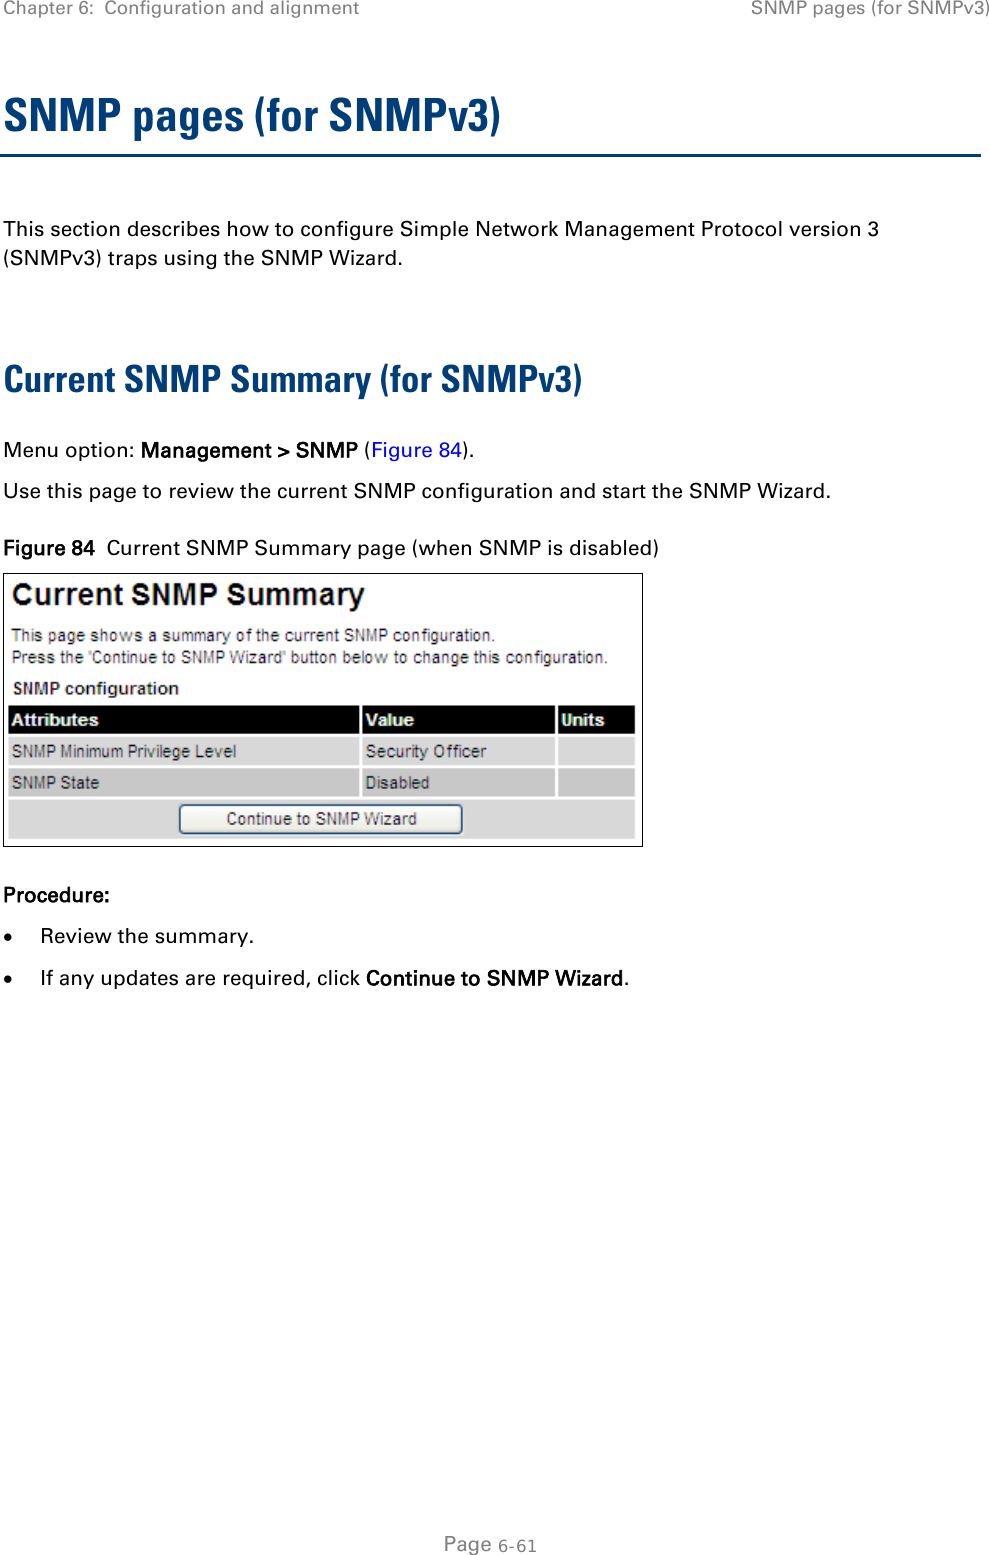 Chapter 6:  Configuration and alignment SNMP pages (for SNMPv3)  SNMP pages (for SNMPv3) This section describes how to configure Simple Network Management Protocol version 3 (SNMPv3) traps using the SNMP Wizard.  Current SNMP Summary (for SNMPv3) Menu option: Management &gt; SNMP (Figure 84). Use this page to review the current SNMP configuration and start the SNMP Wizard. Figure 84  Current SNMP Summary page (when SNMP is disabled)  Procedure: • Review the summary. • If any updates are required, click Continue to SNMP Wizard.   Page 6-61 